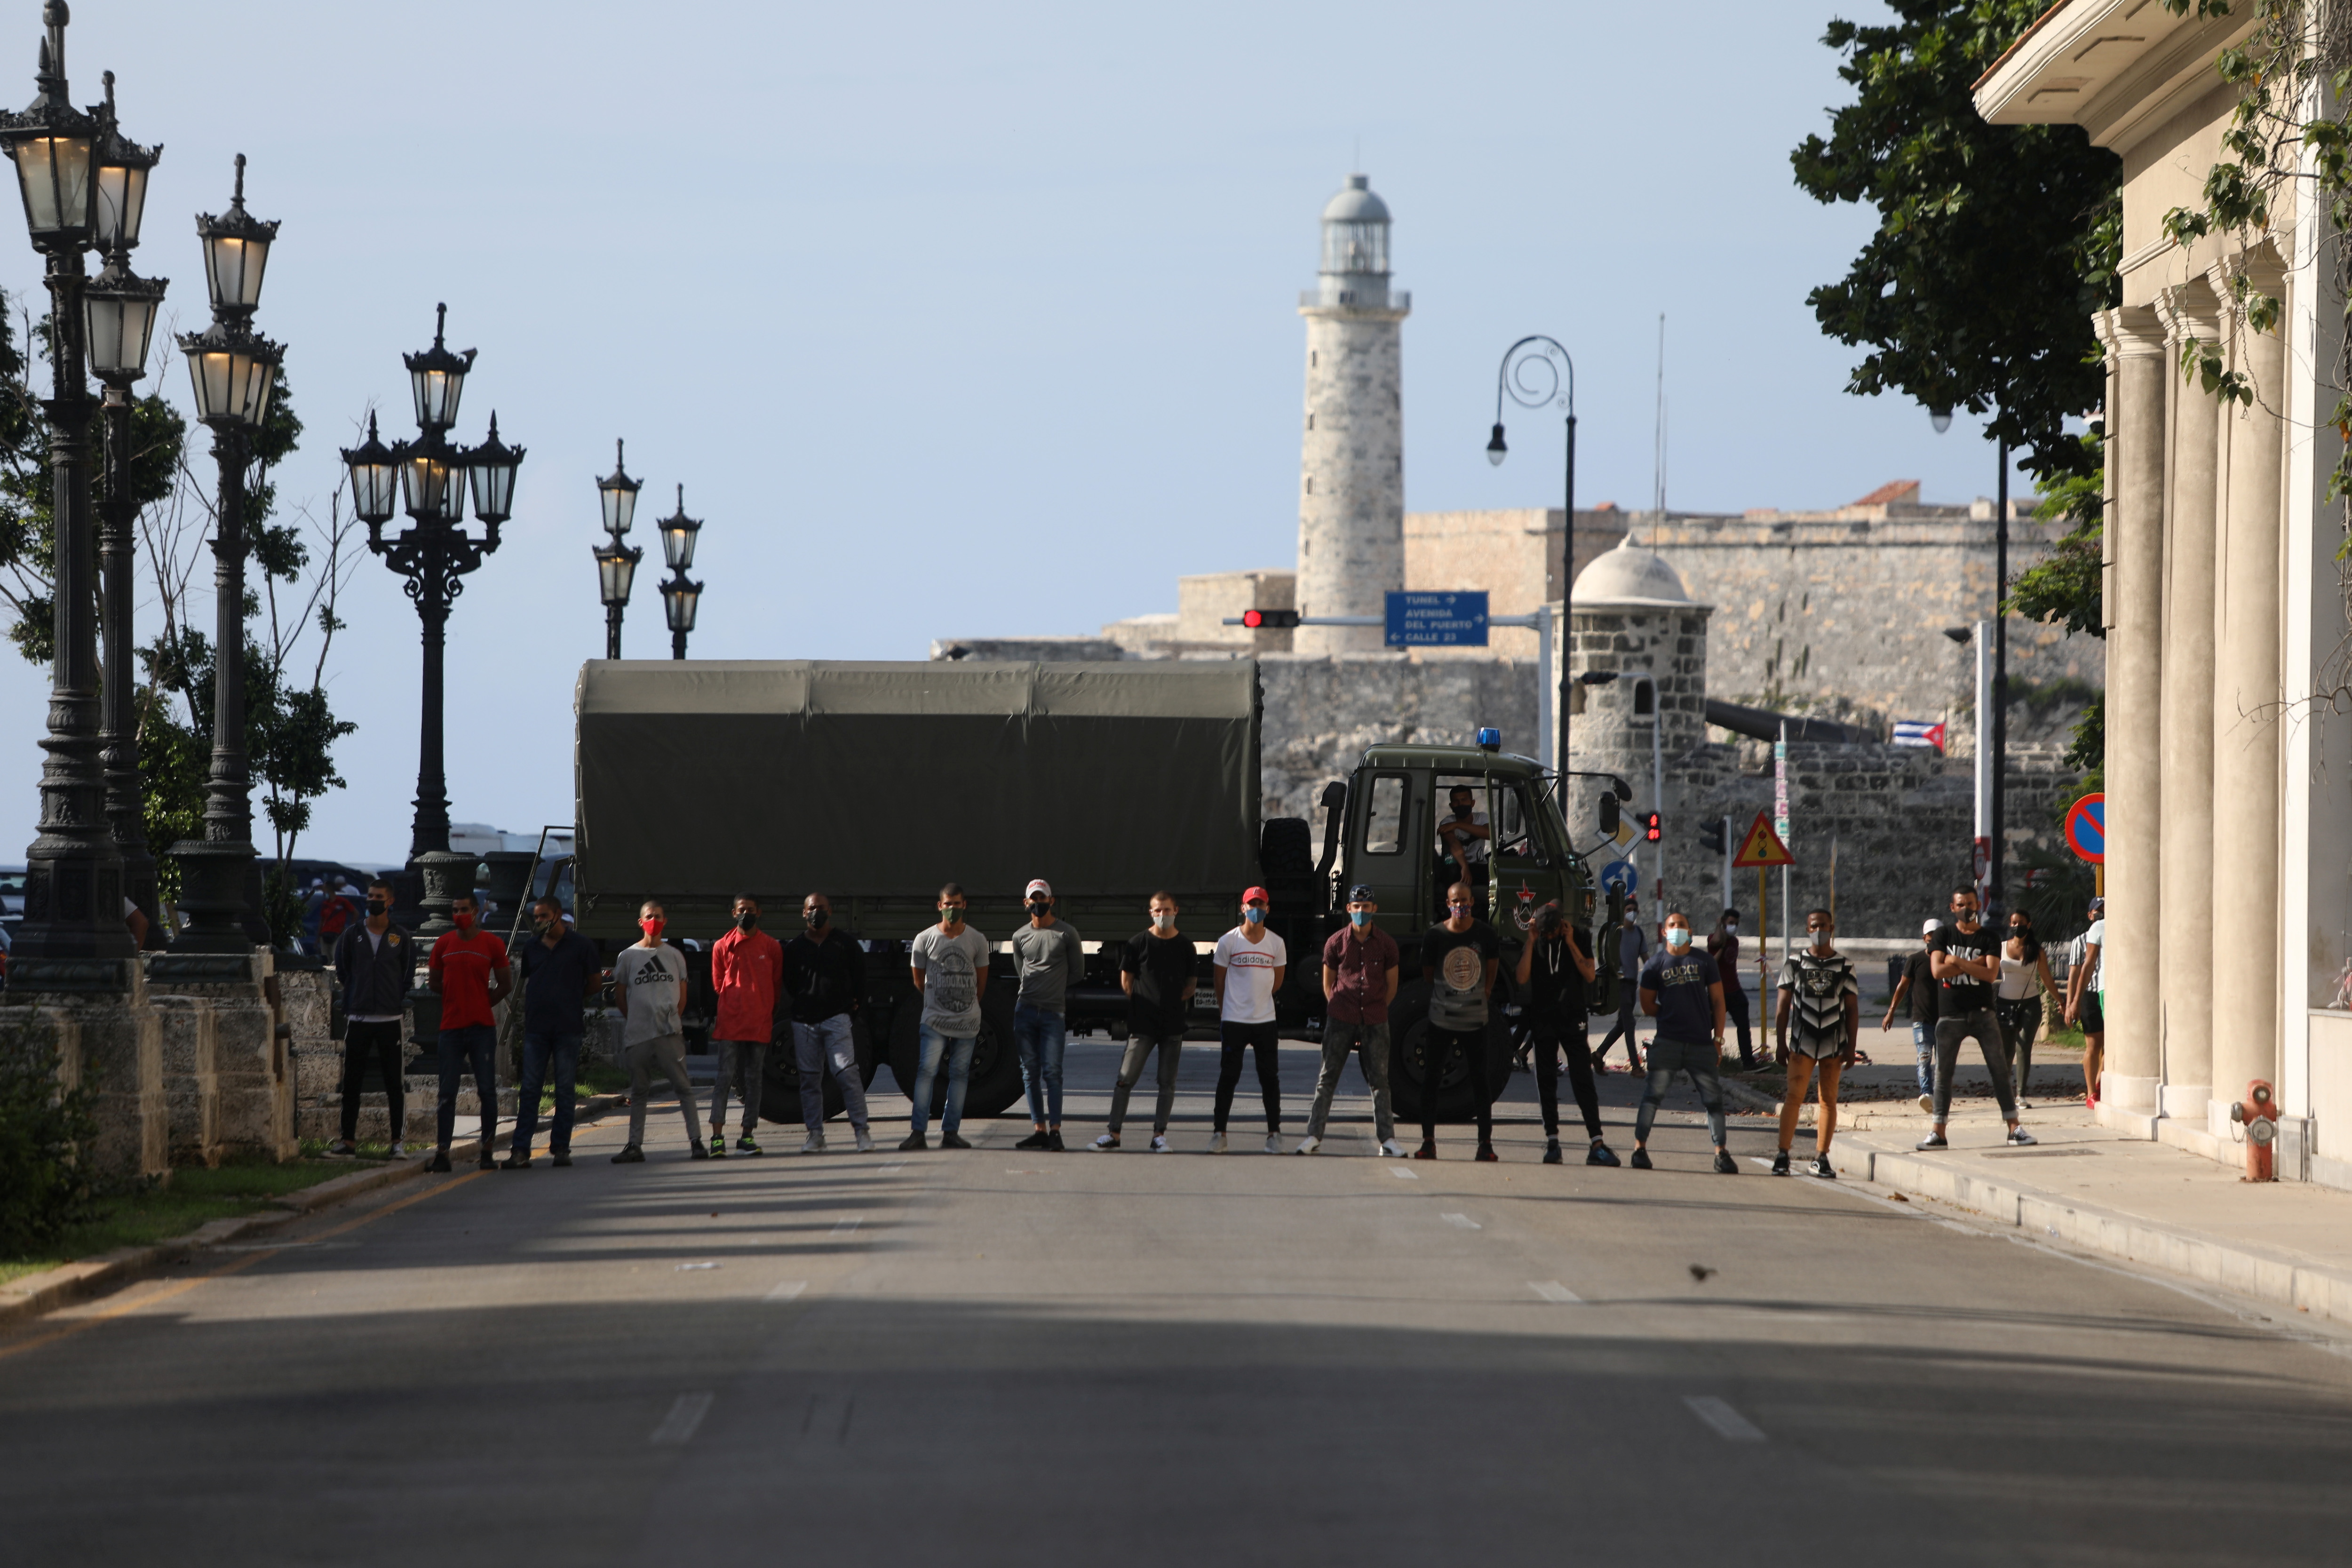 Plain clothes police block a road during a protest against and in support of the government in Havana